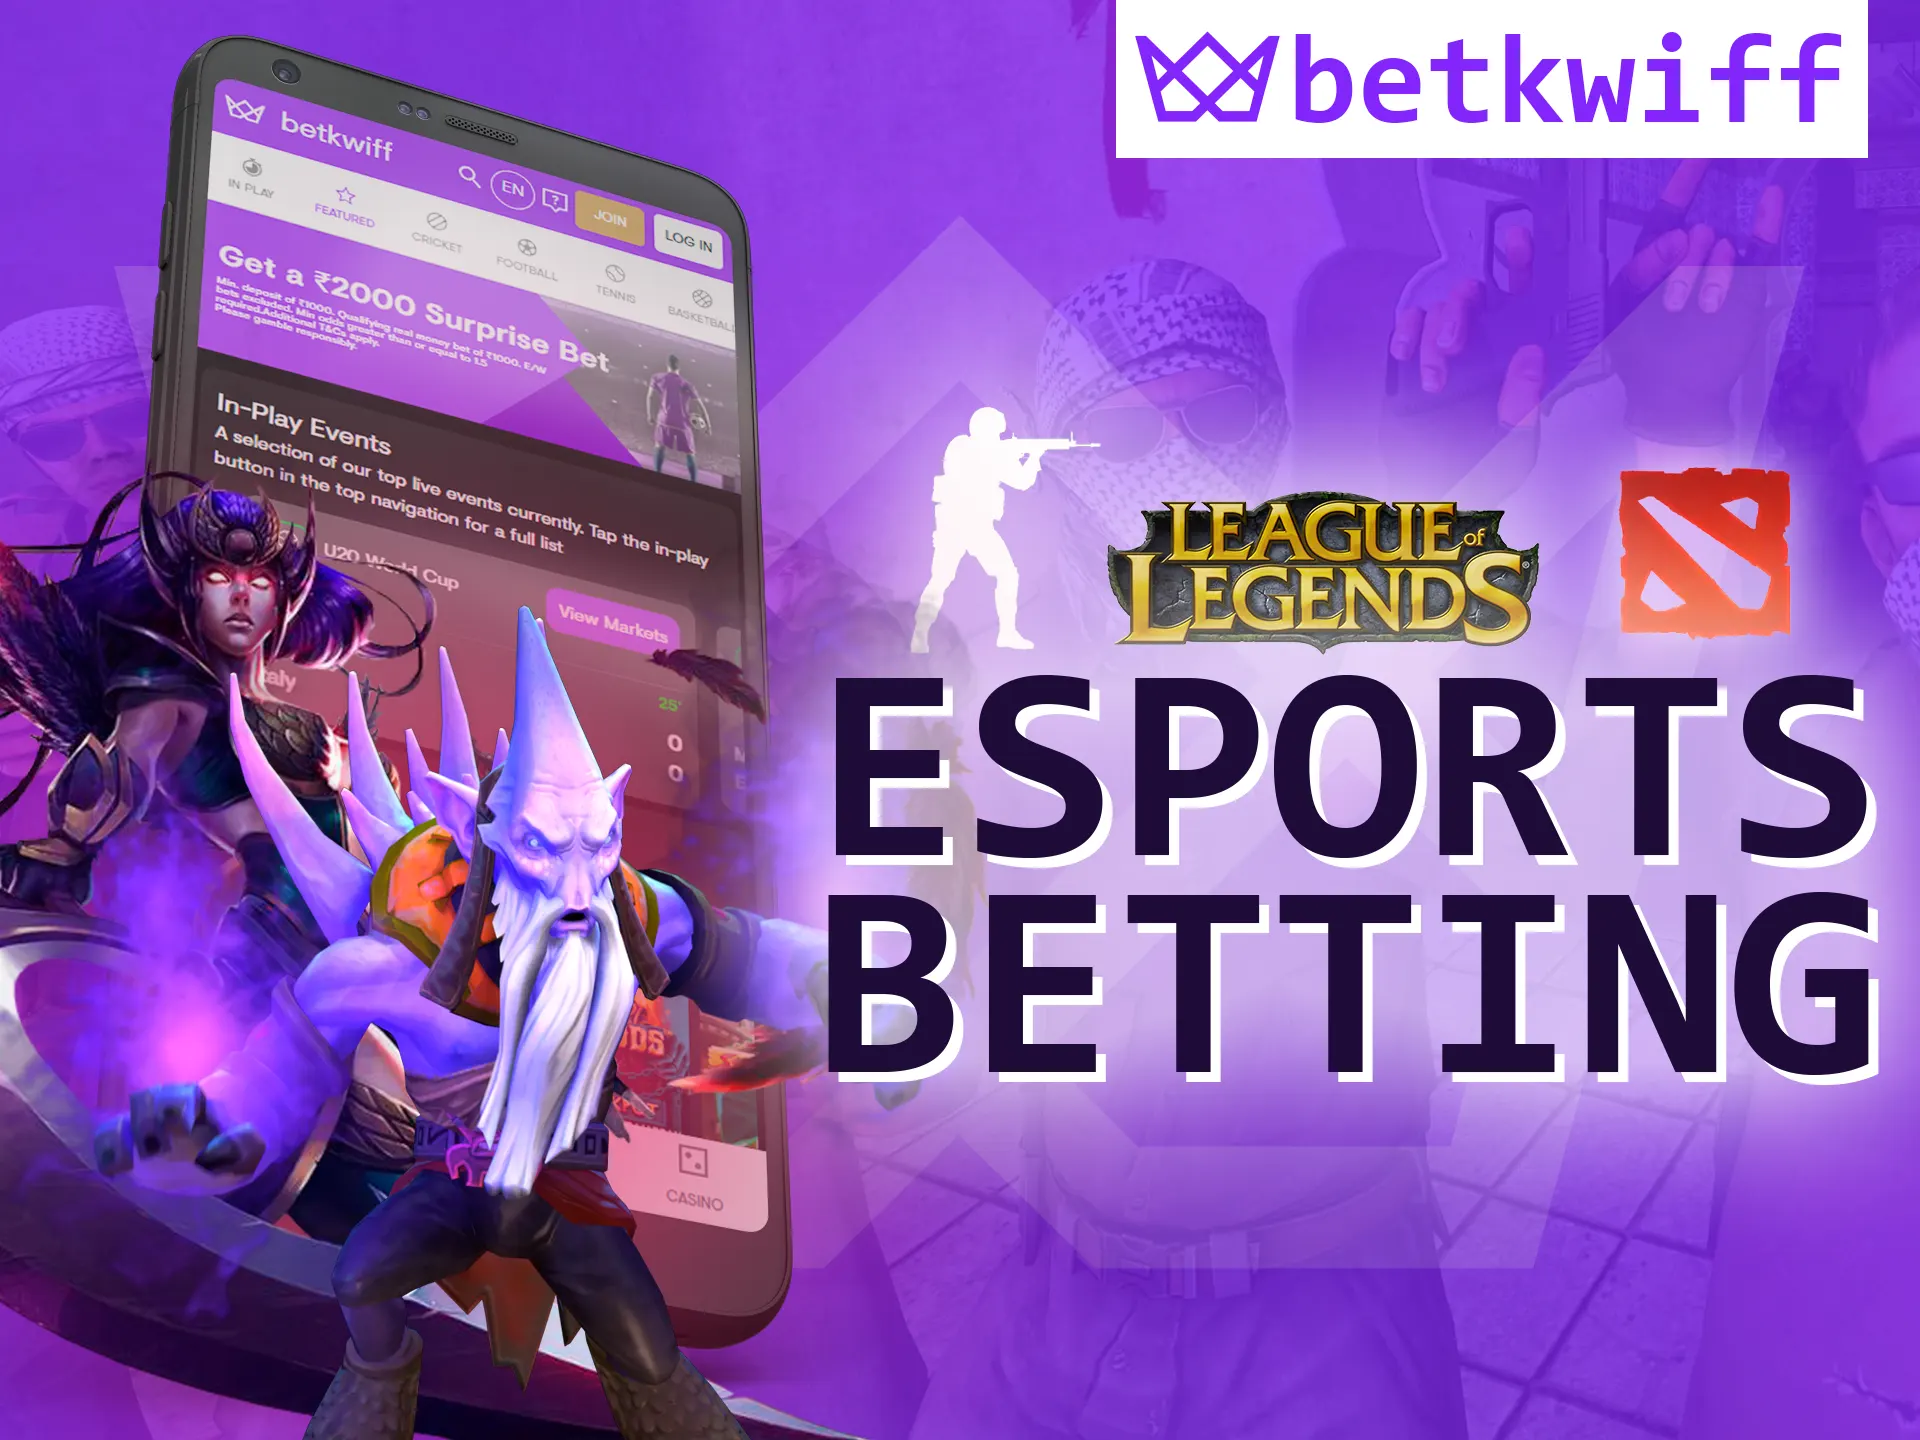 In the Betkwiff app you can bet on any esport tournament.